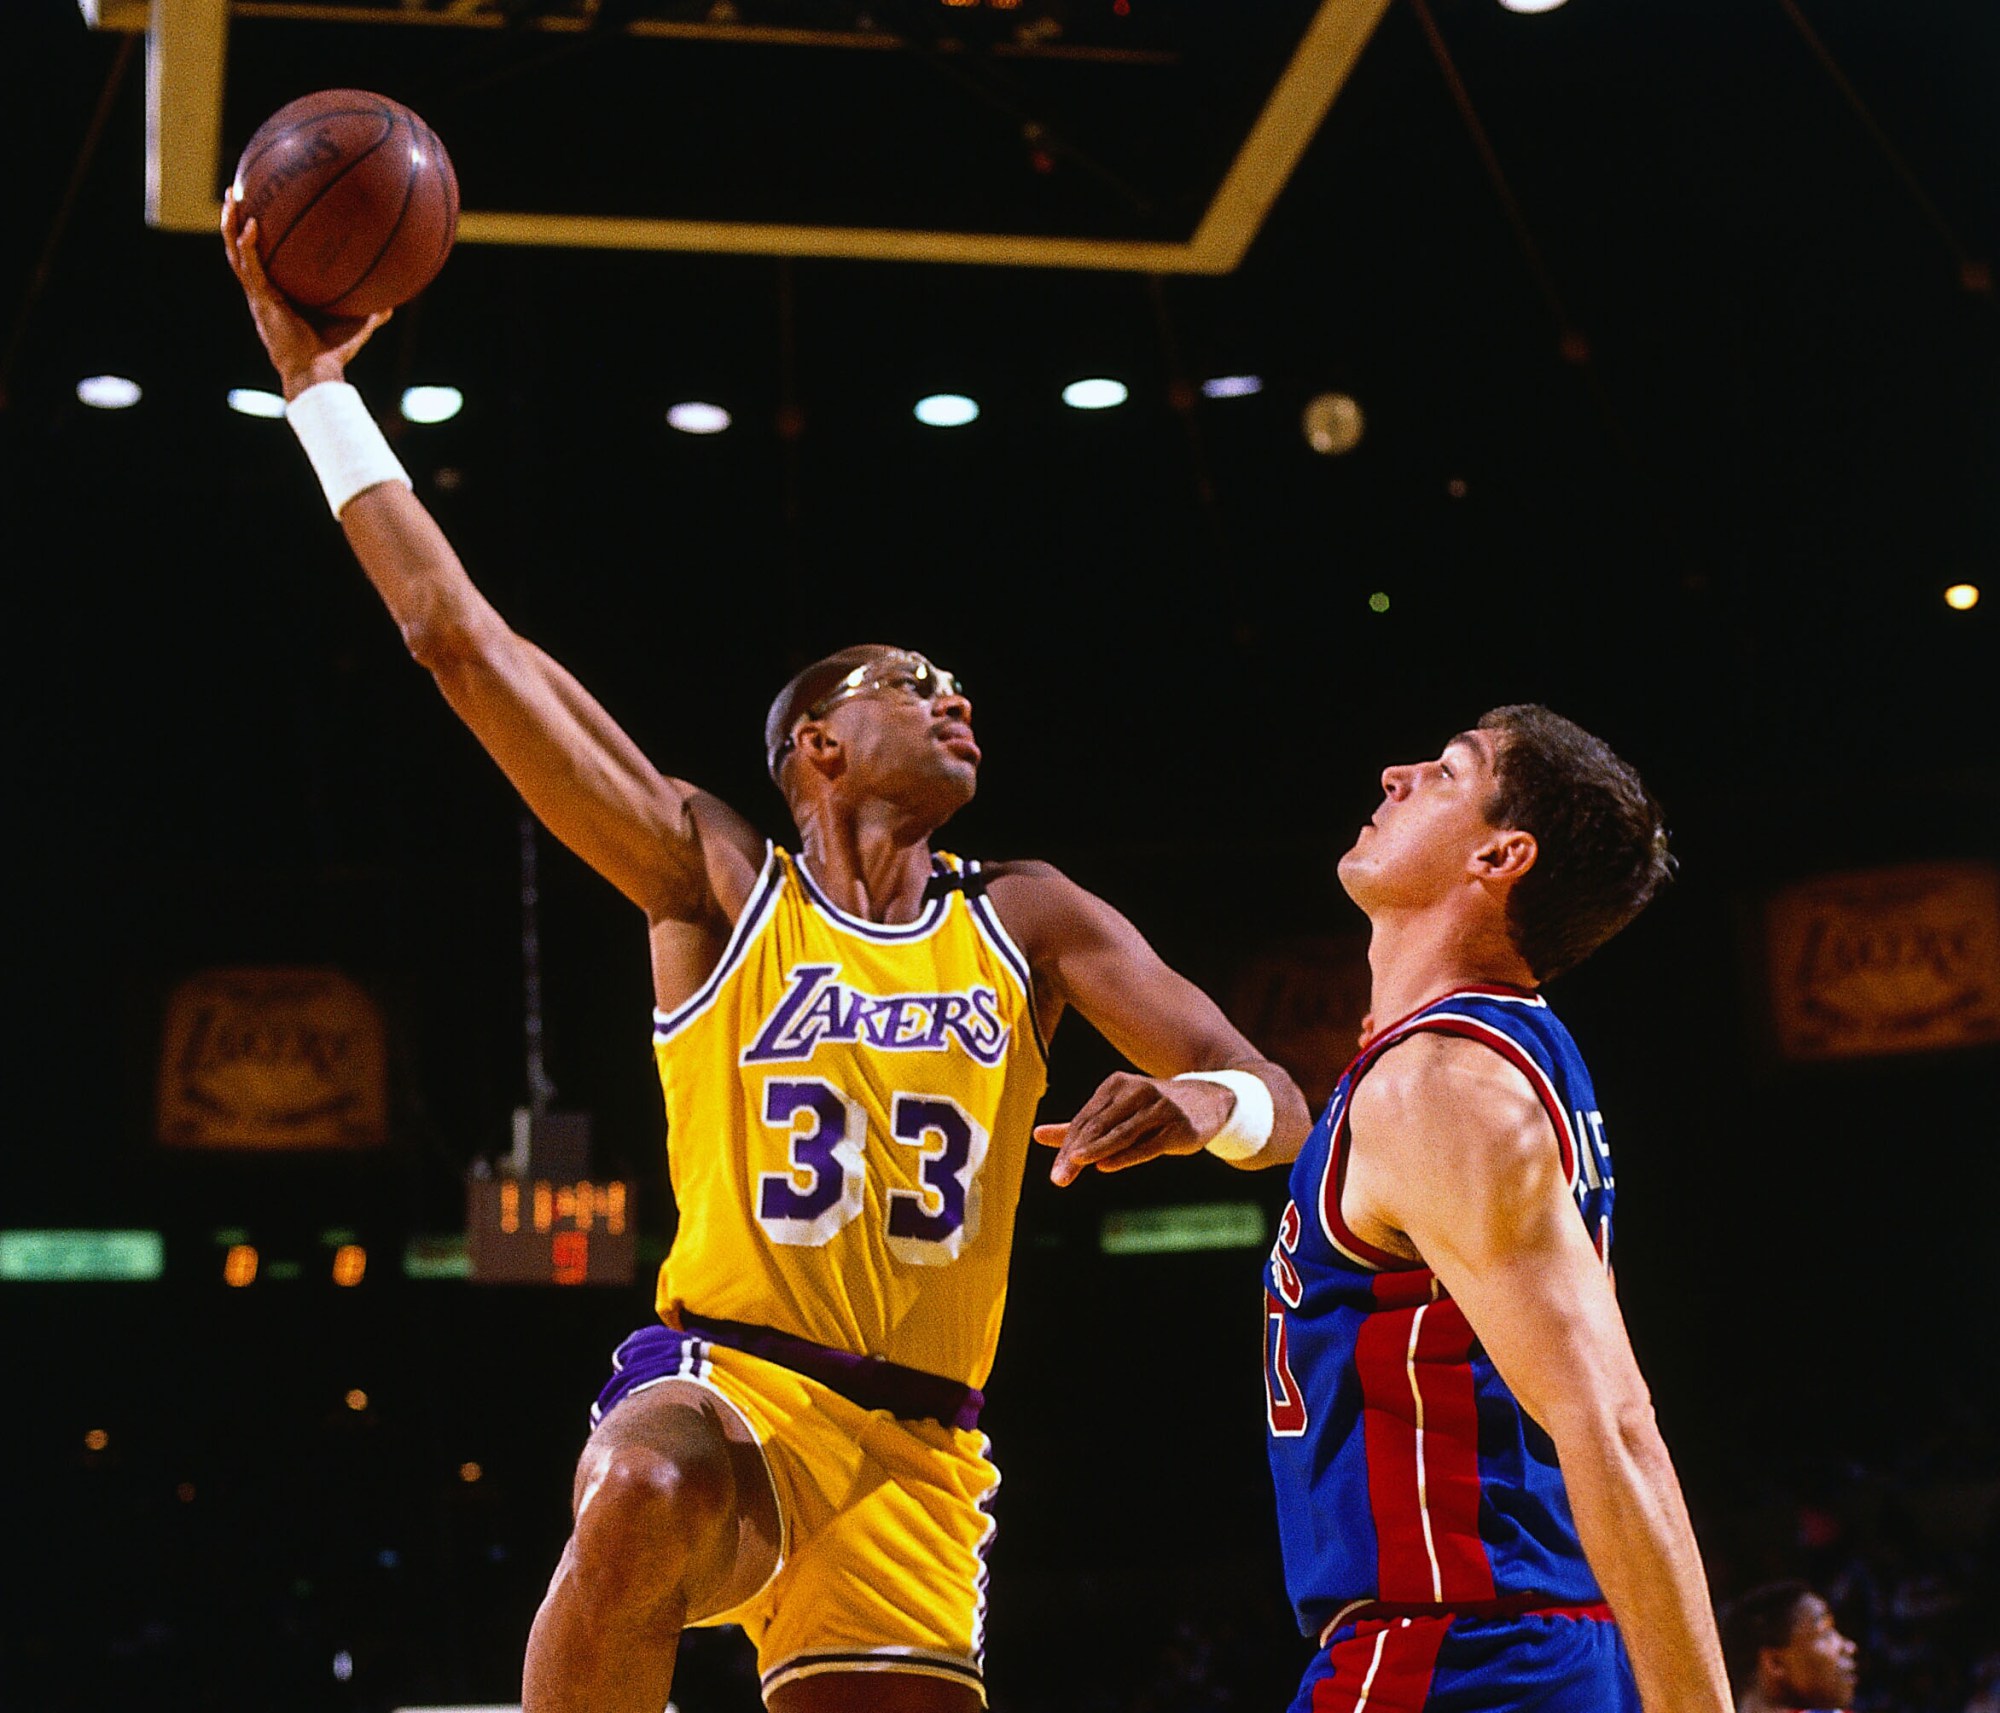 Kareem Abdul-Jabbar - Among the five best players of all time